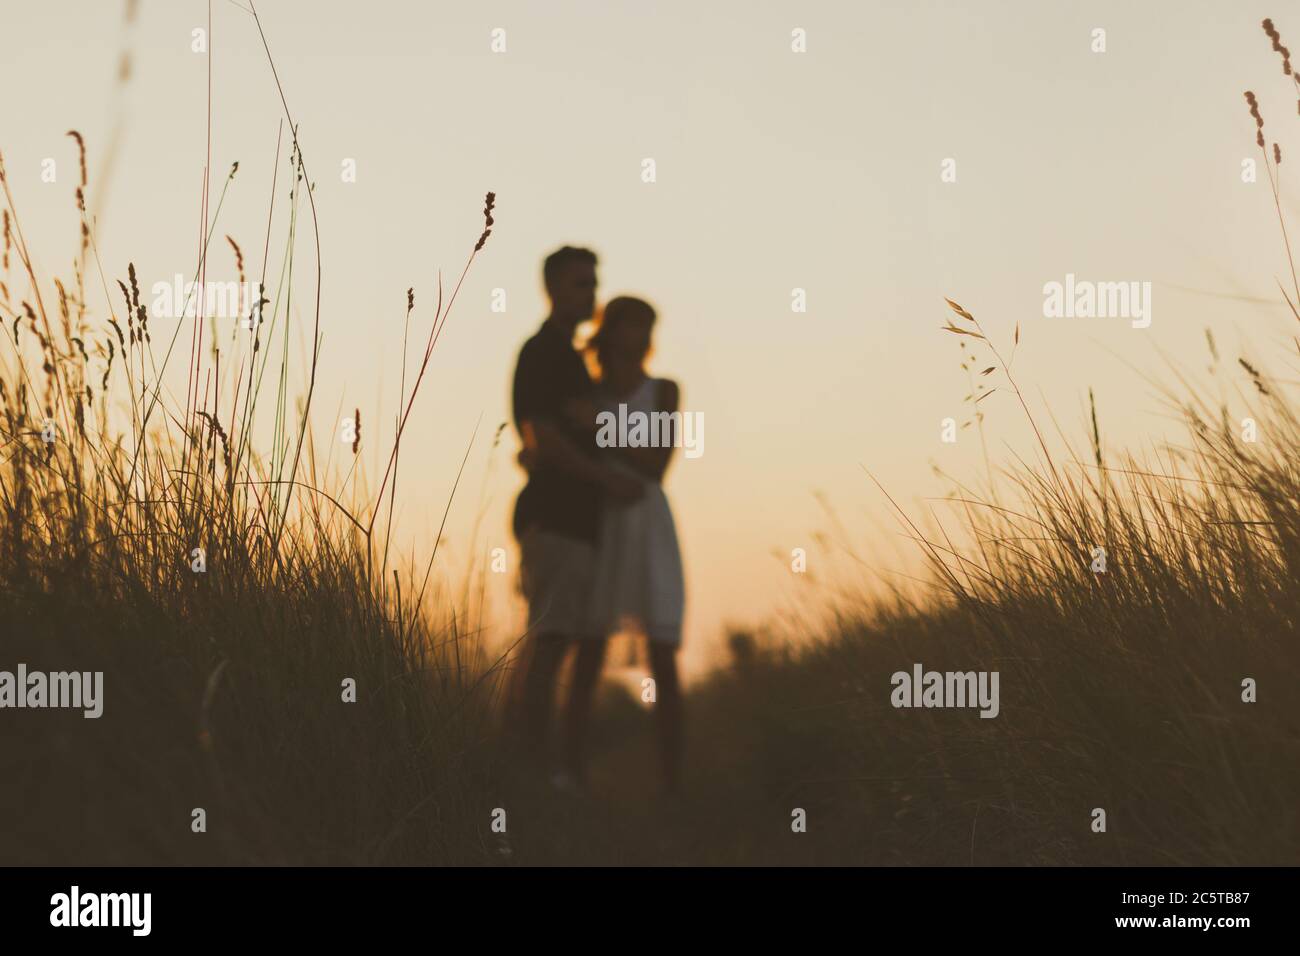 Couple in love watching sunset outdoor in a wheat field at summer. Blurred background, focus on the grass. Stock Photo